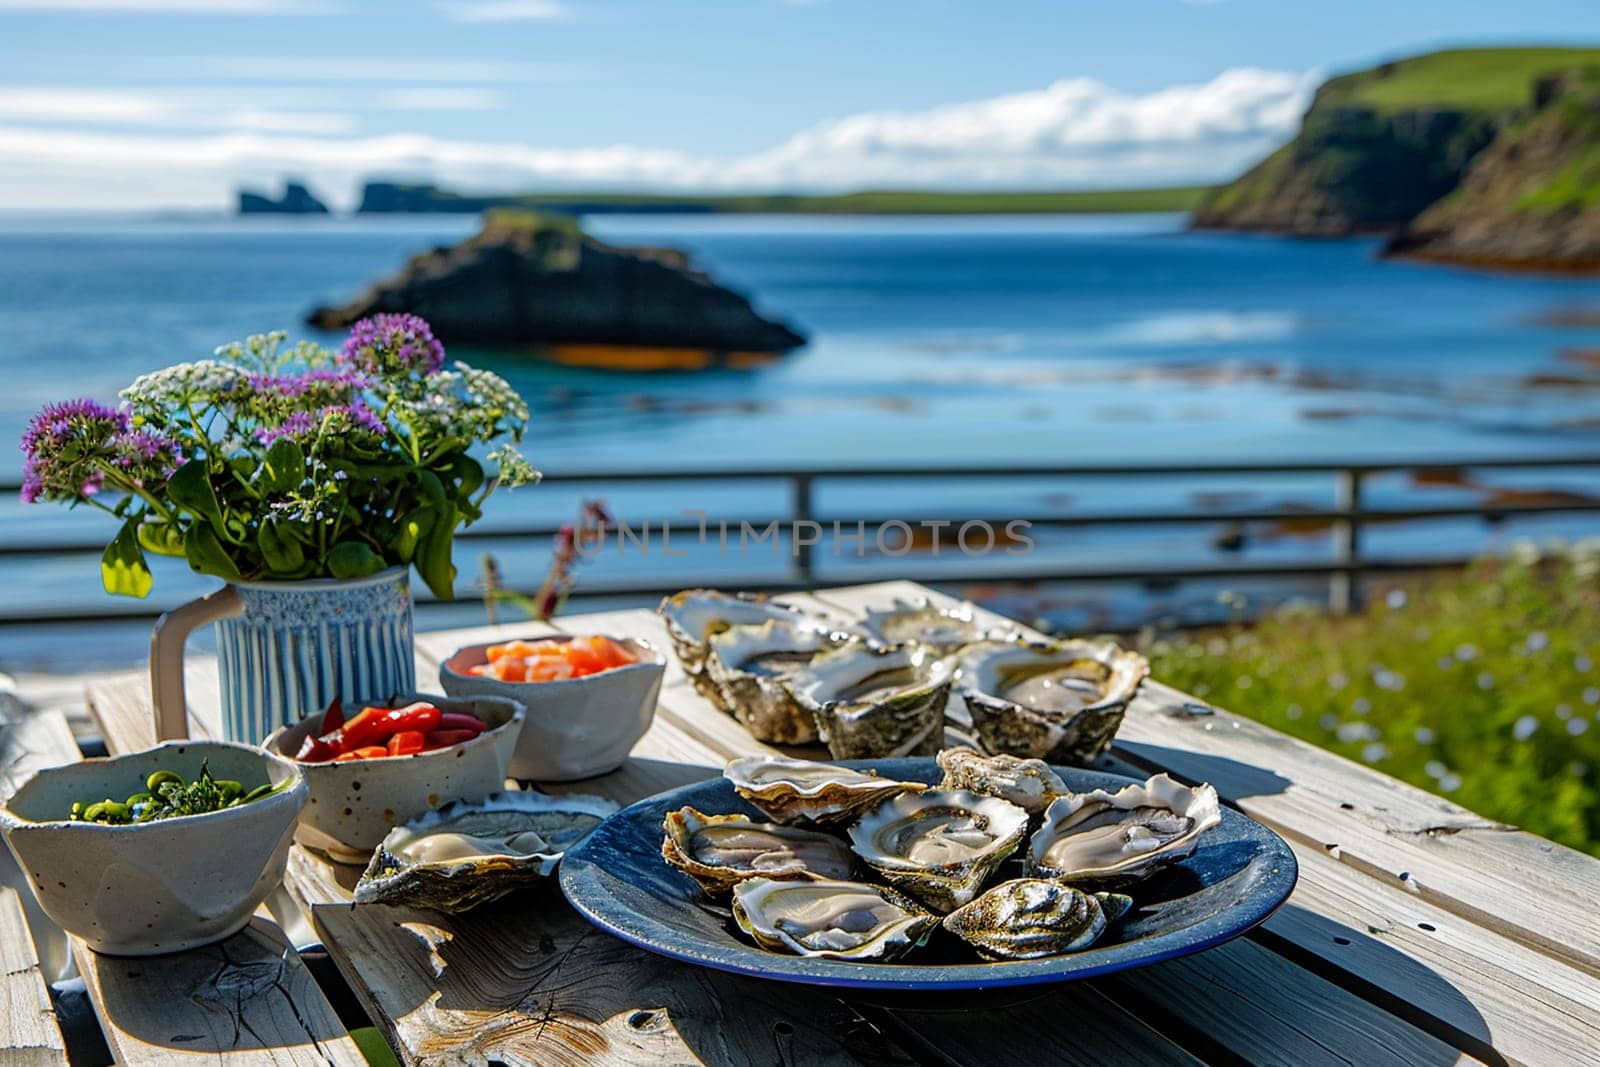 Assorted fresh oysters on a plate with sea view. Gourmet seafood dining experience with salad and tomatoes on outdoor wooden table.